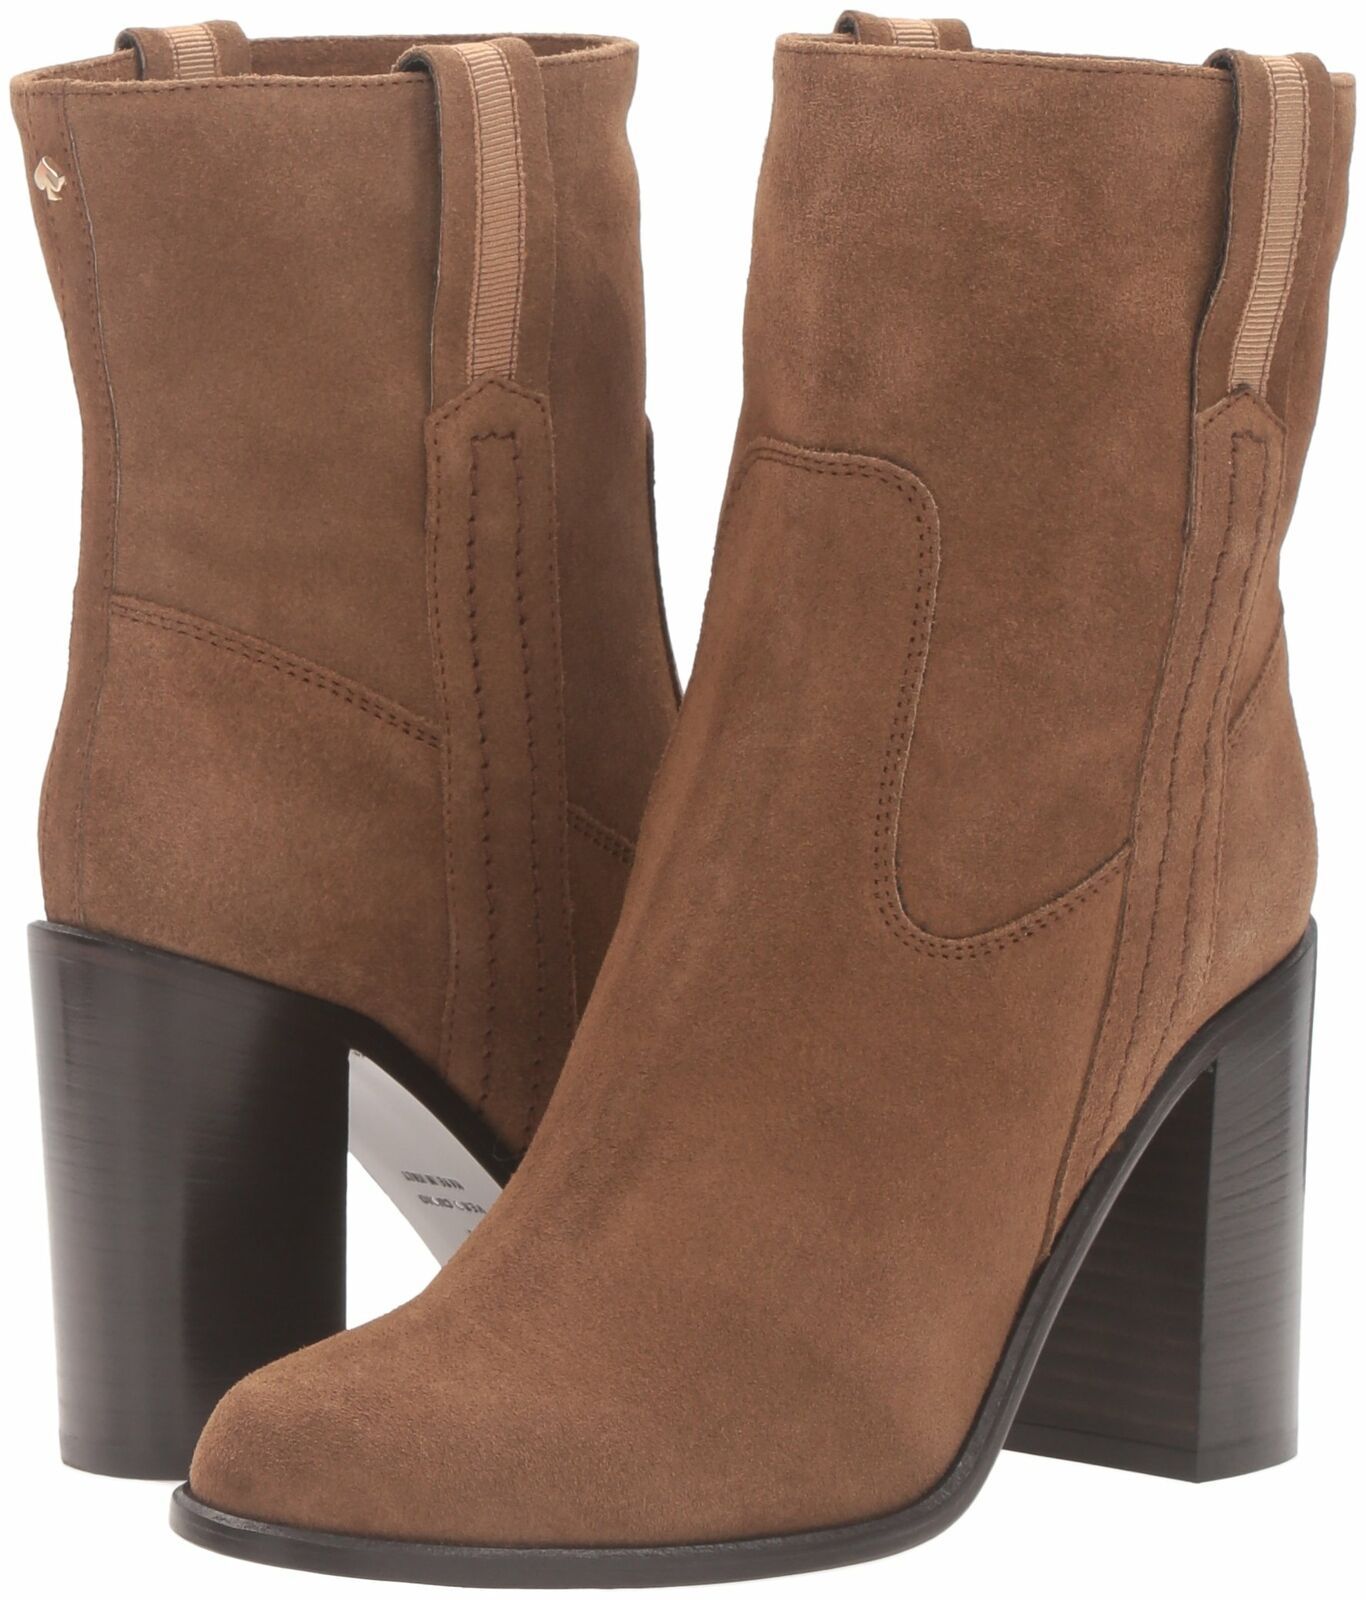 kate spade donella boot